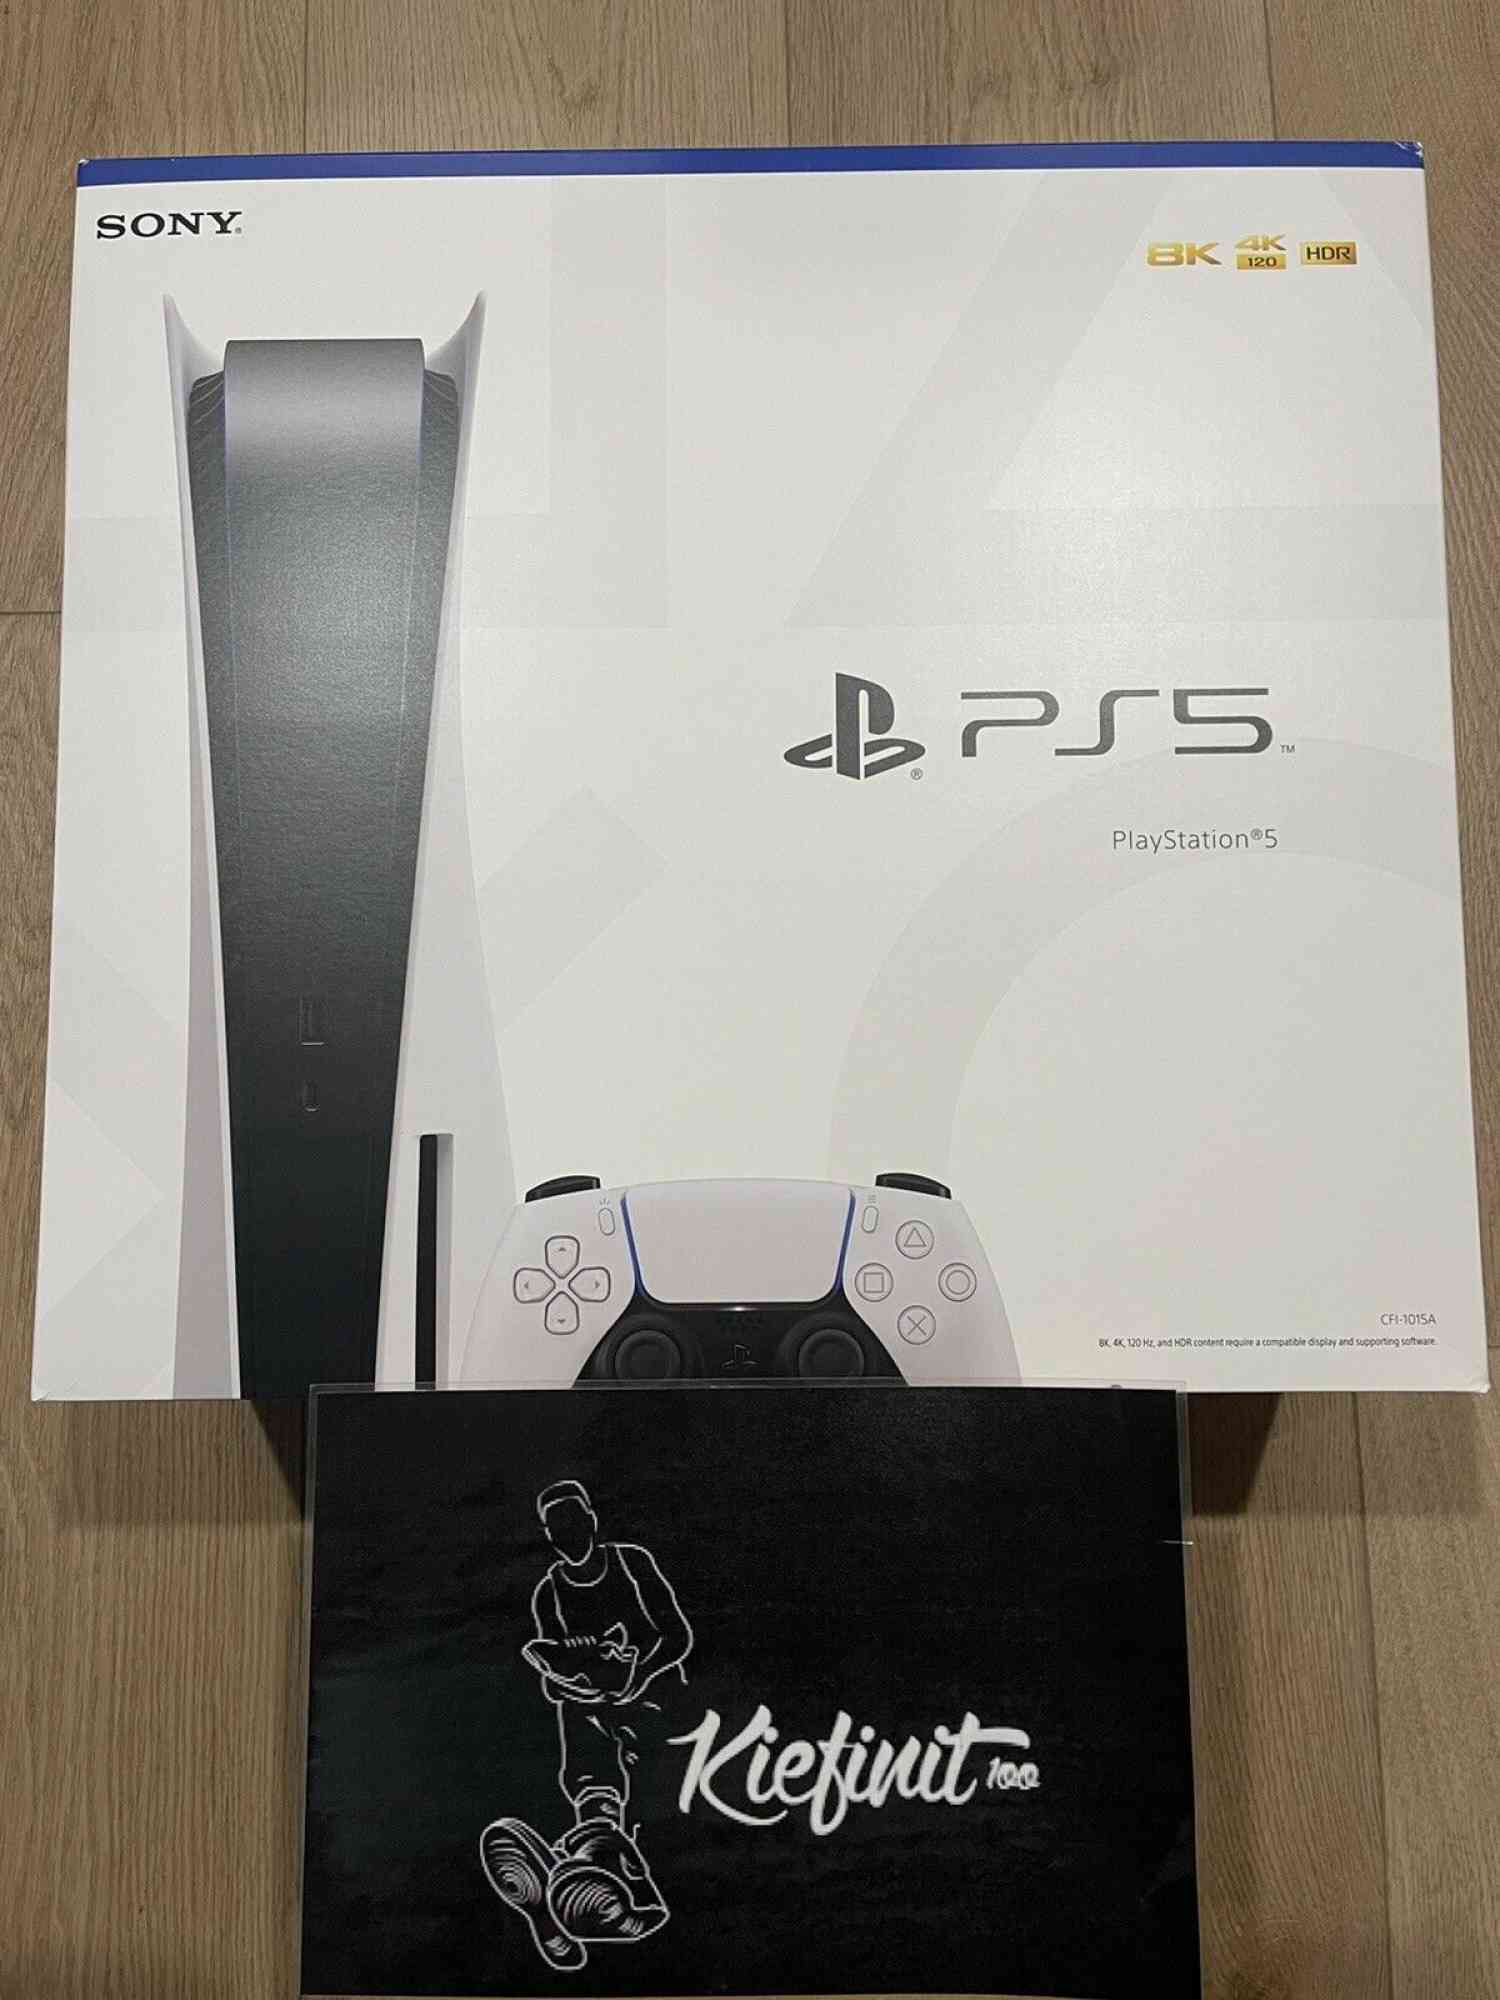 FOR SALE Sony Playstation 5 with disc tray